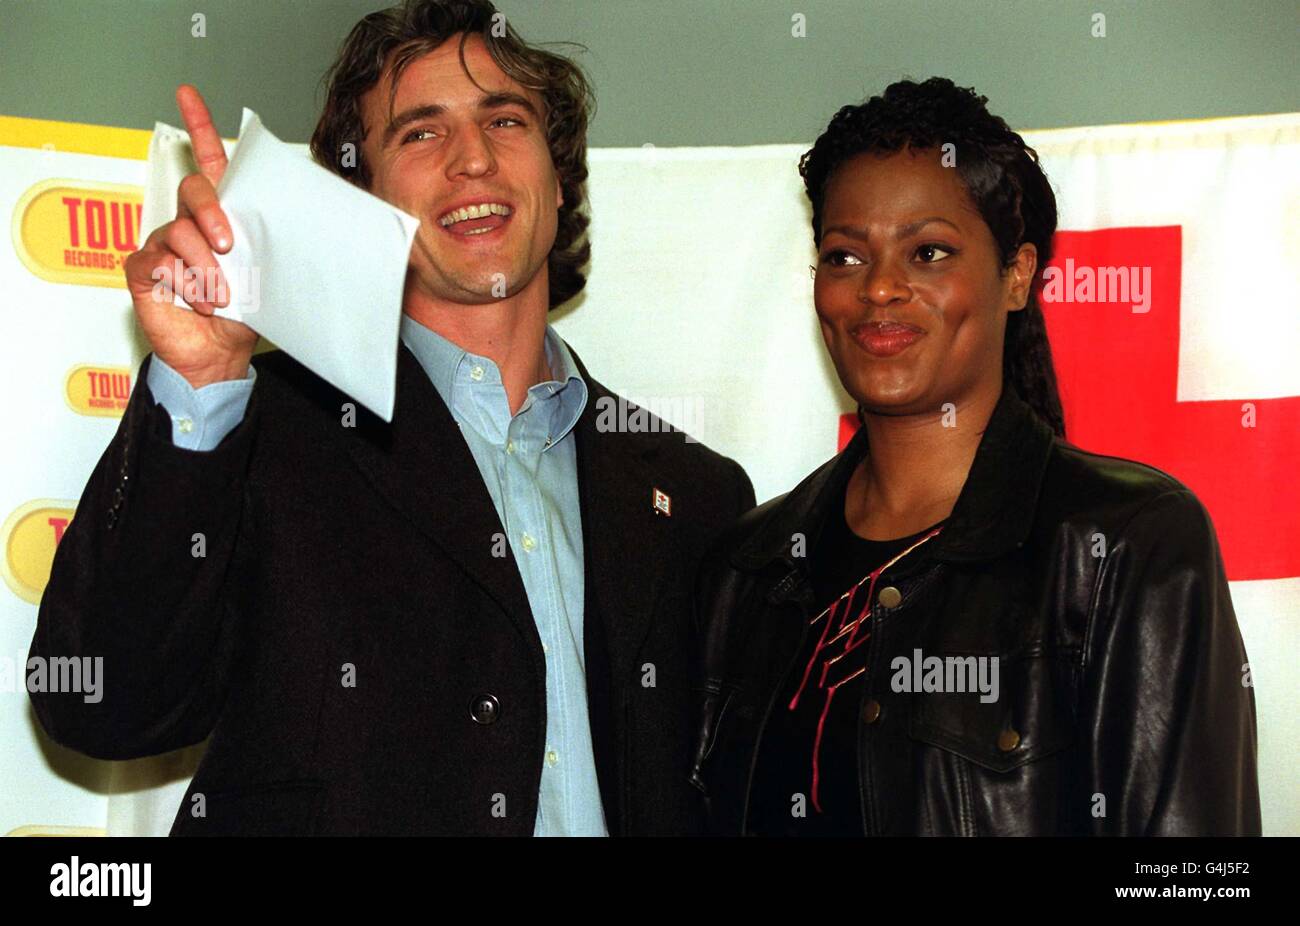 Tottenham Hotspur footballer David Ginola and pop star Des'ree at London's Tower Records to announce the Ottawa Convention's ban on anti-personnel mines which will pave the way for a total eradication of the mines. Stock Photo